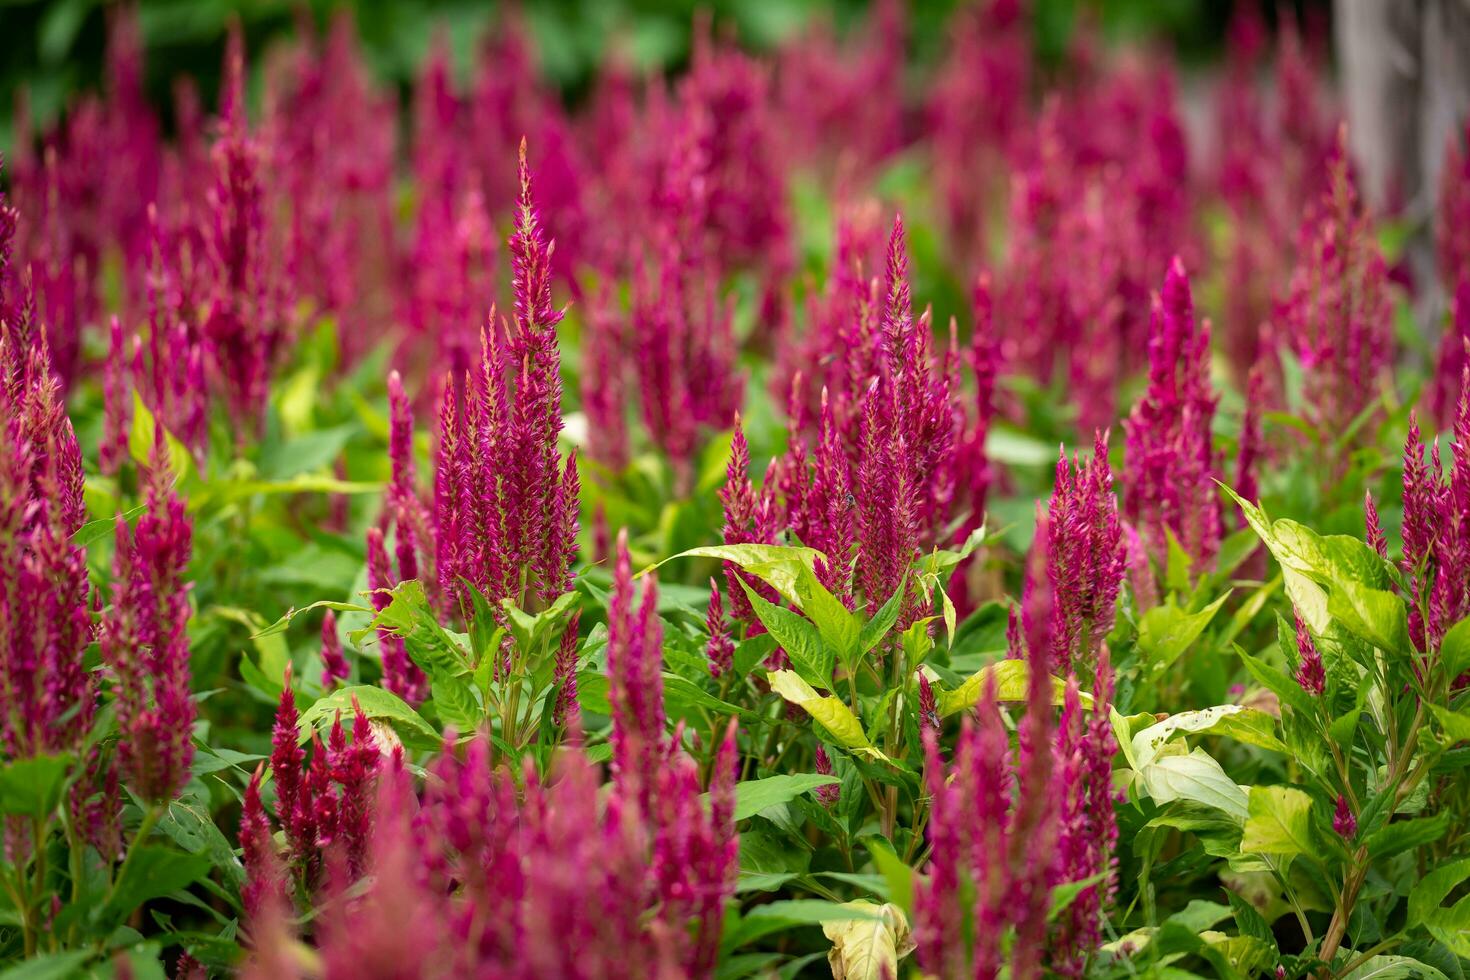 Pink Cockscomb or Abanico flowers Celosia Argentea are adorned in the Botanical Gardens in Bangkok for the public to see the gardens and take pictures as a backdrop that gives a fresh feeling. photo